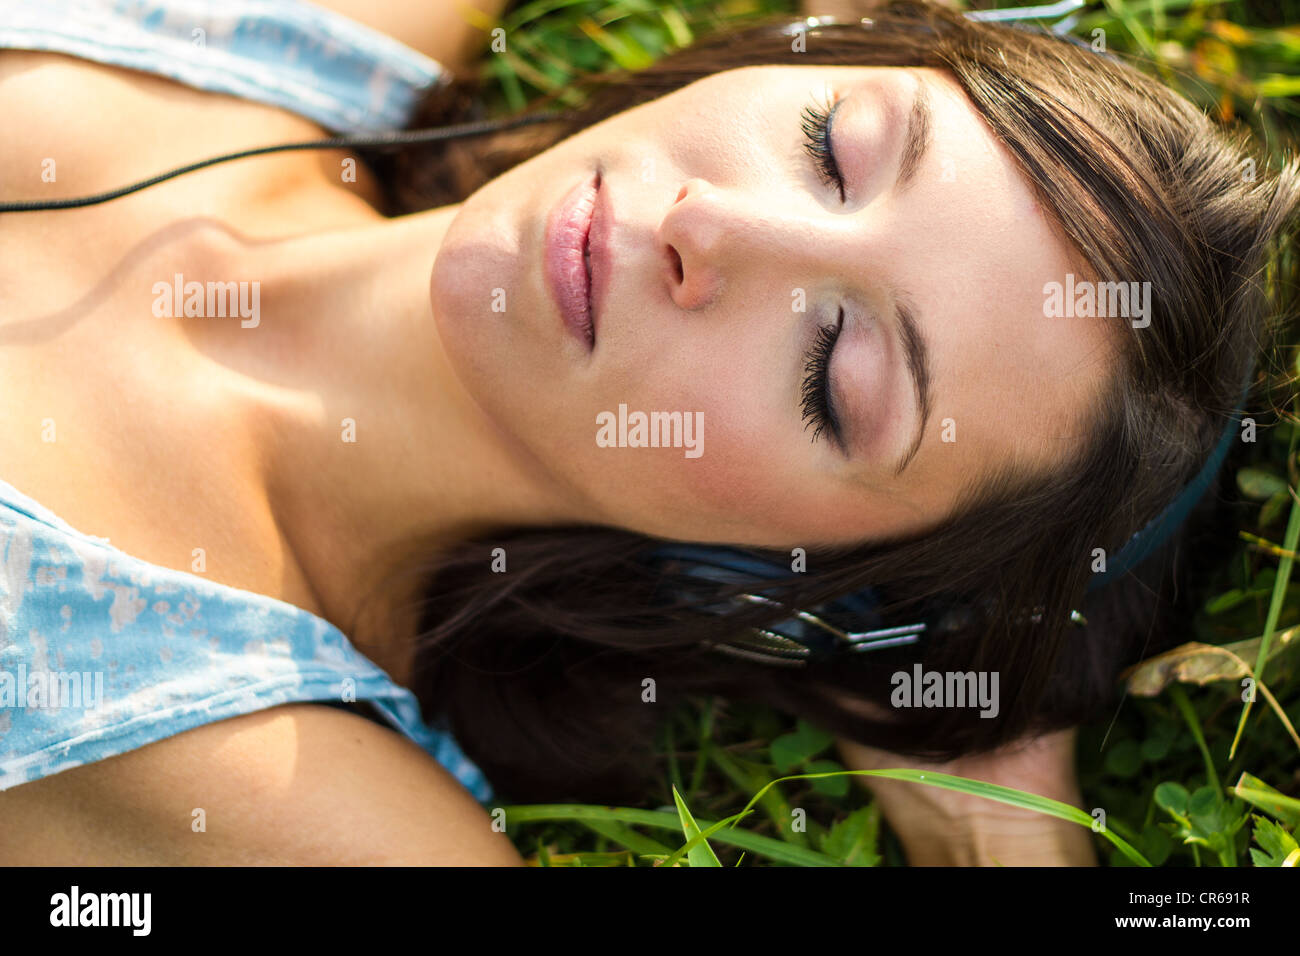 music in grass Stock Photo